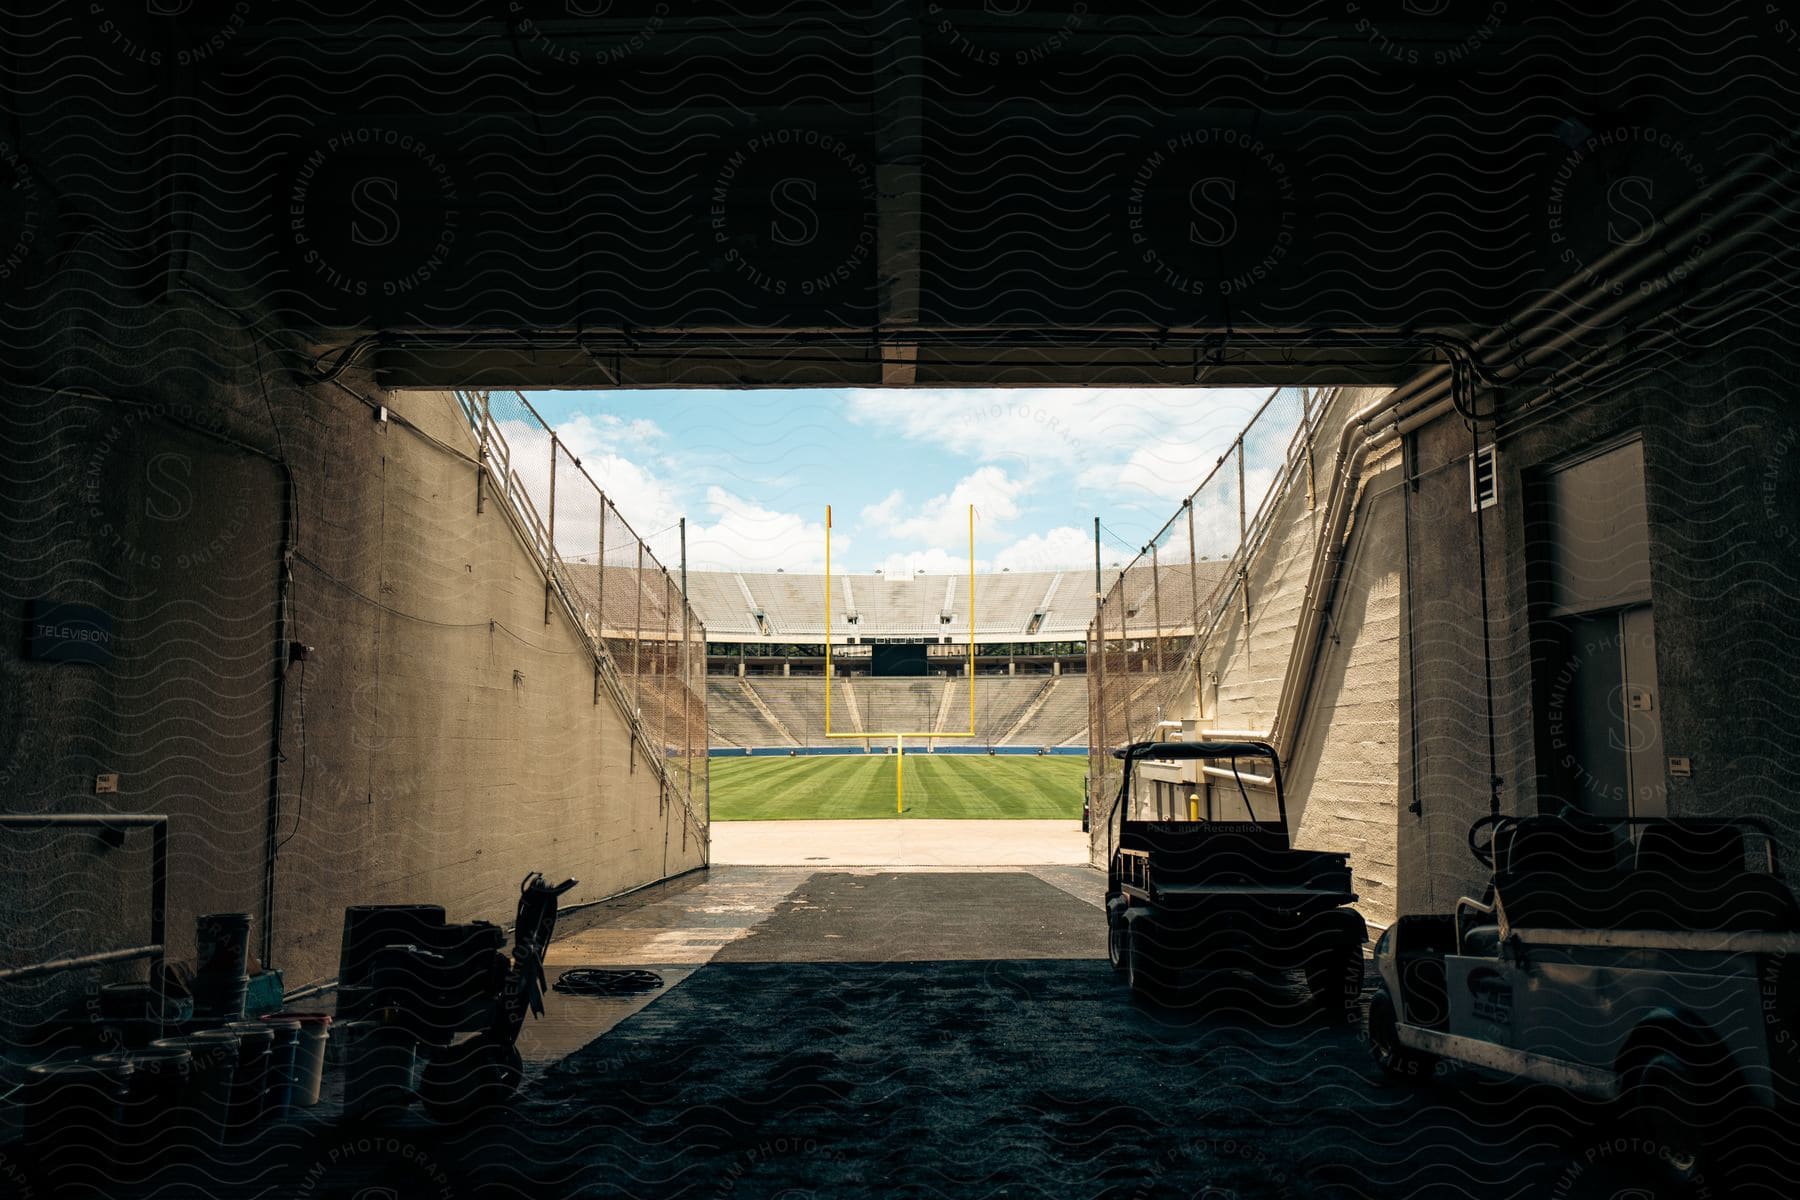 Blue sky with sun and white clouds over a football stadium as seen from inside the locker room tunnel entrance